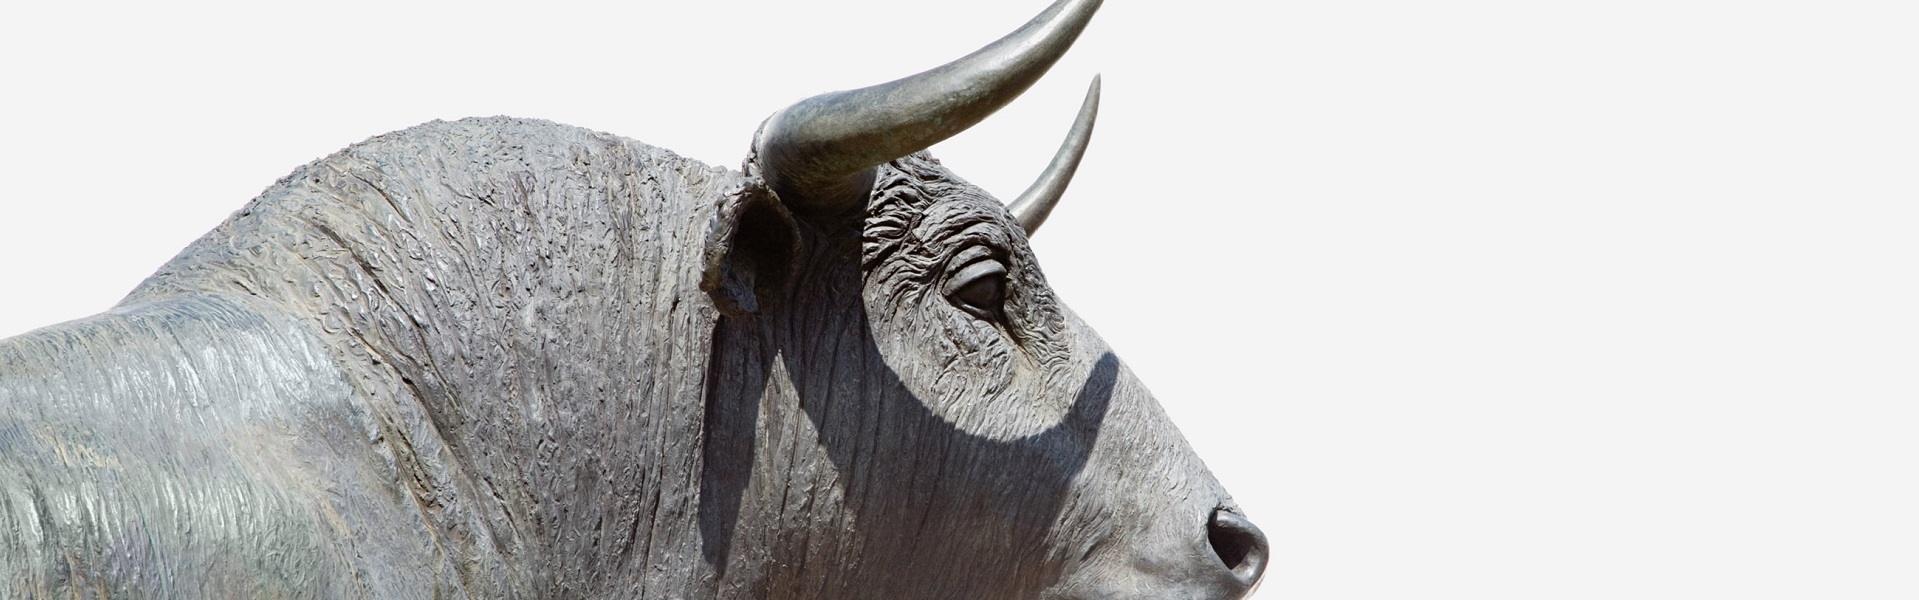 Persevere With The Spirit of Ox: Building Interconnectivity For Midmarket